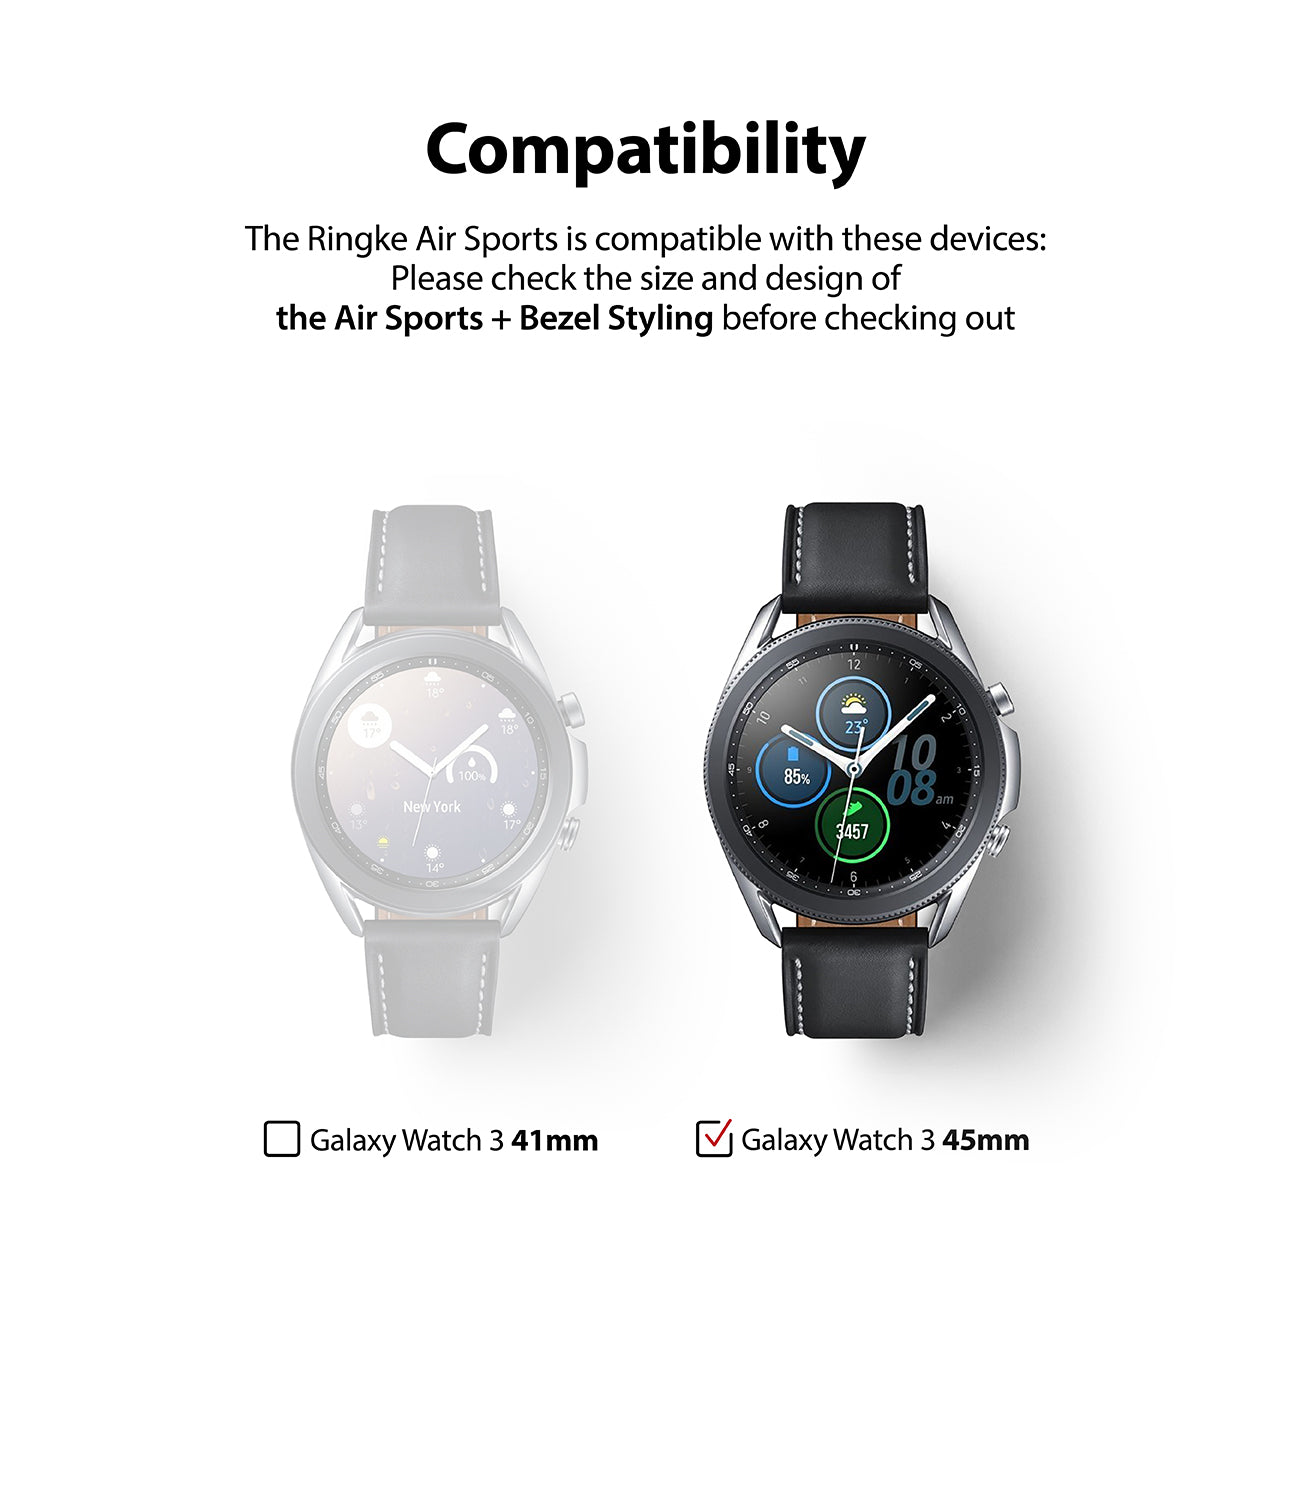 only compatible with galaxy watch 3 45mm